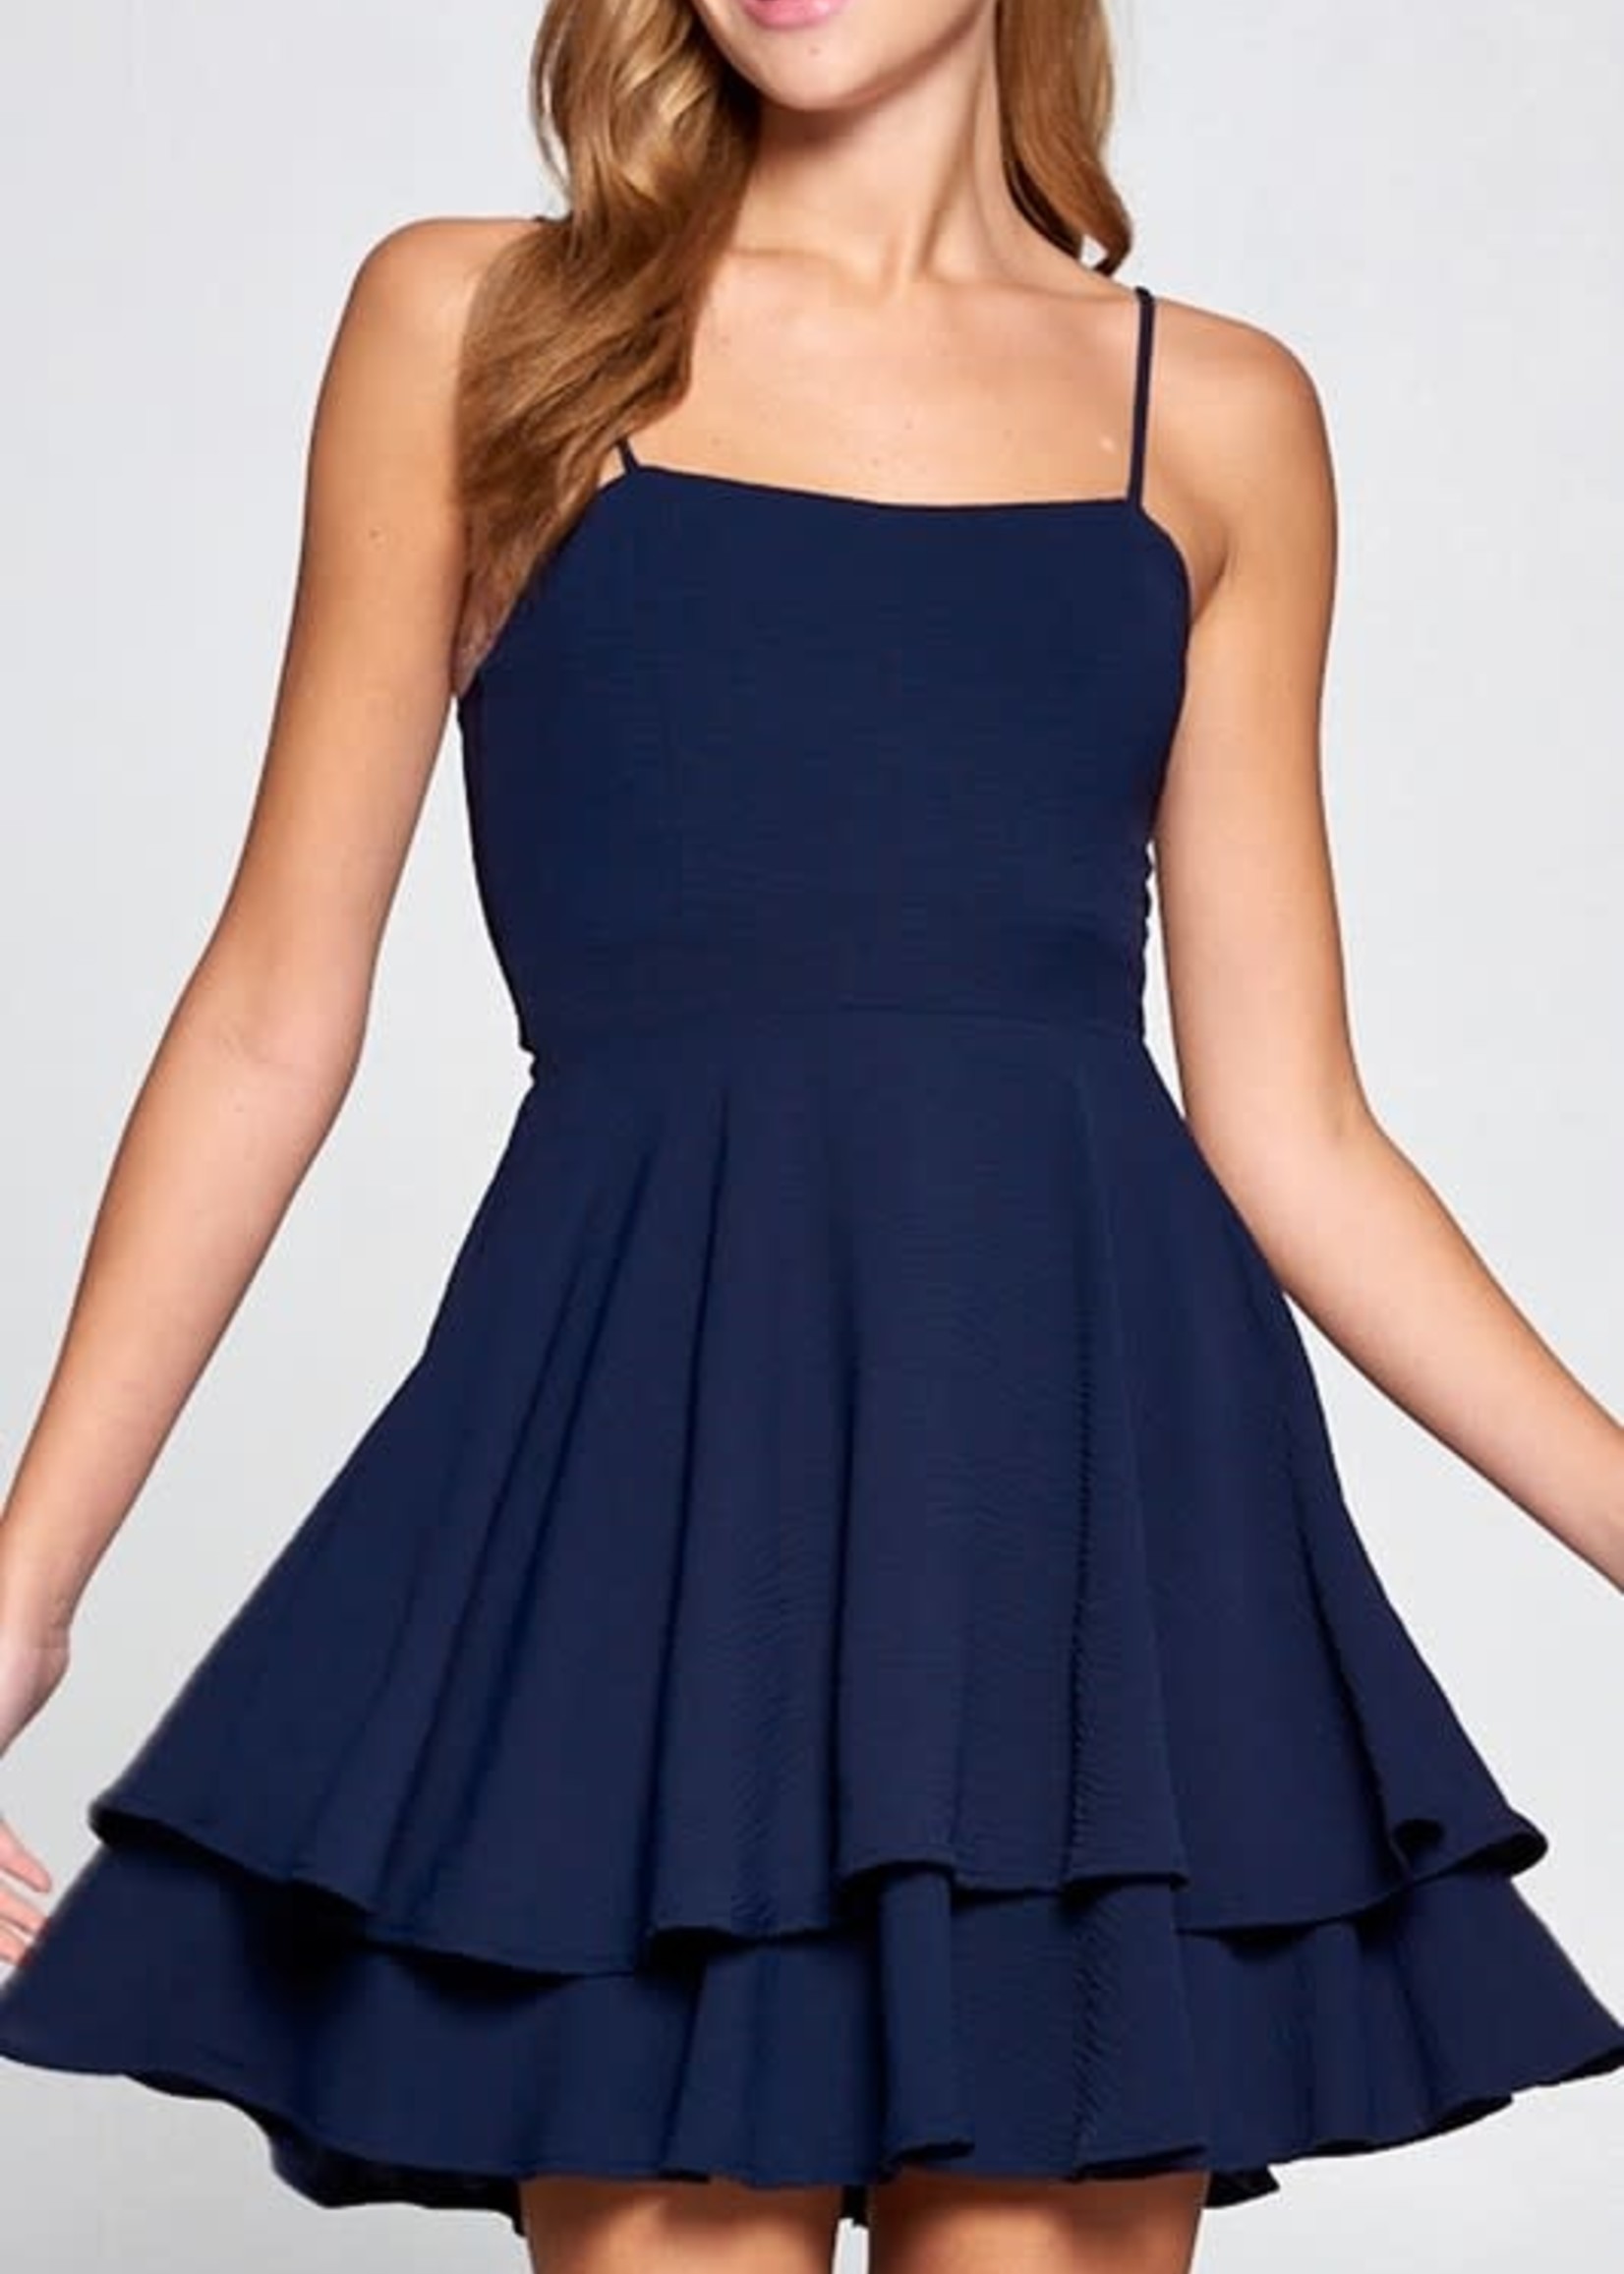 All Dressed Up Tie Back Dress (2 Colors)